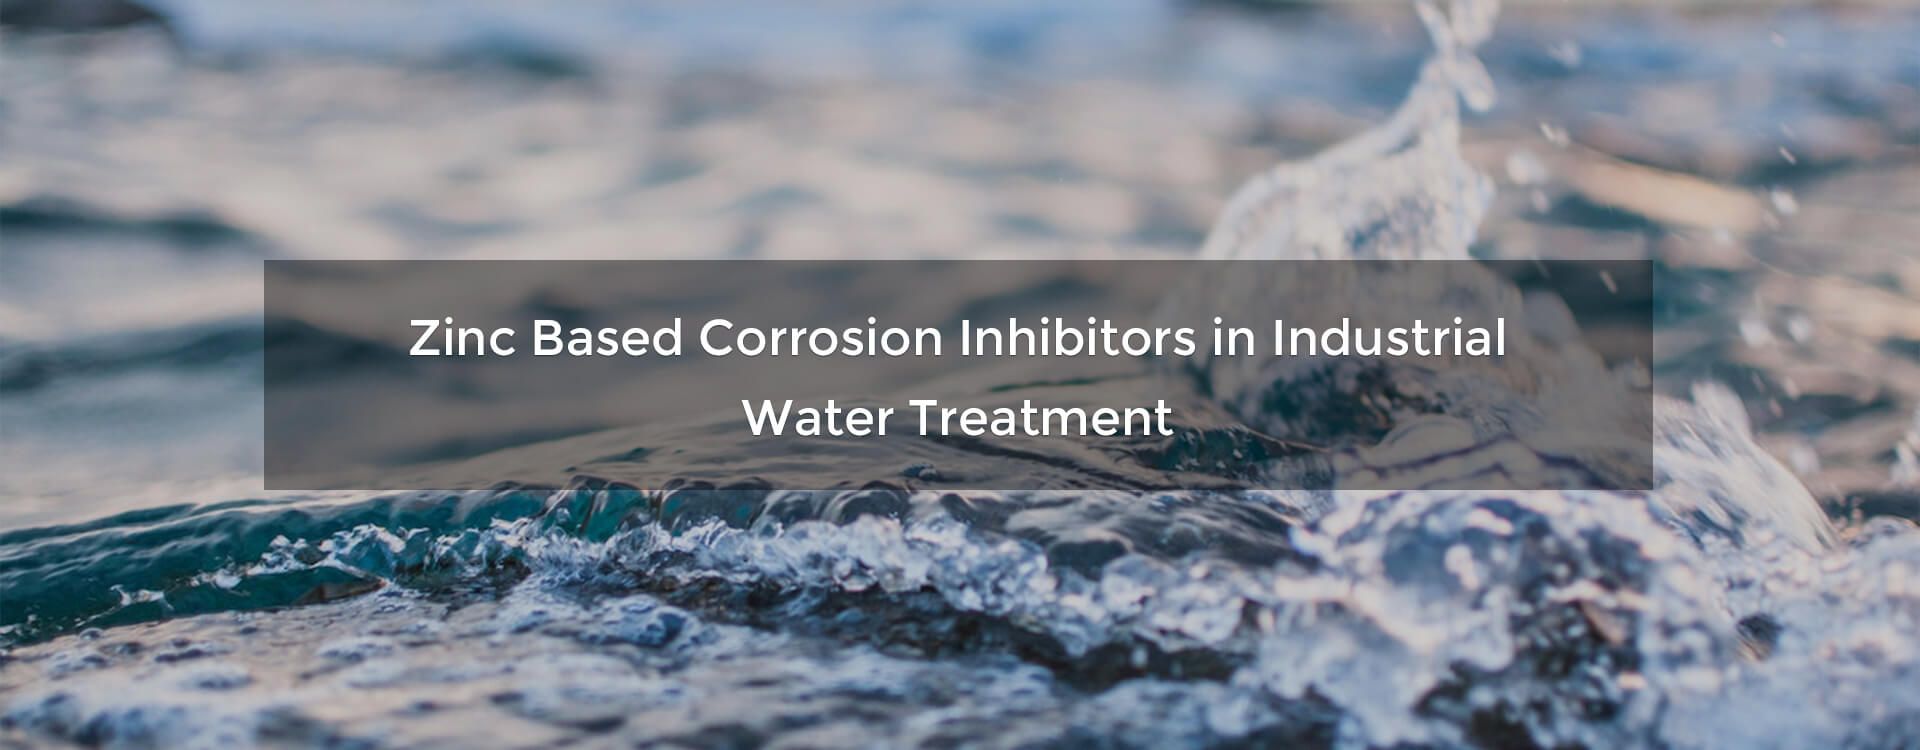 Zinc Based Corrosion Inhibitors in Industrial Water Treatment